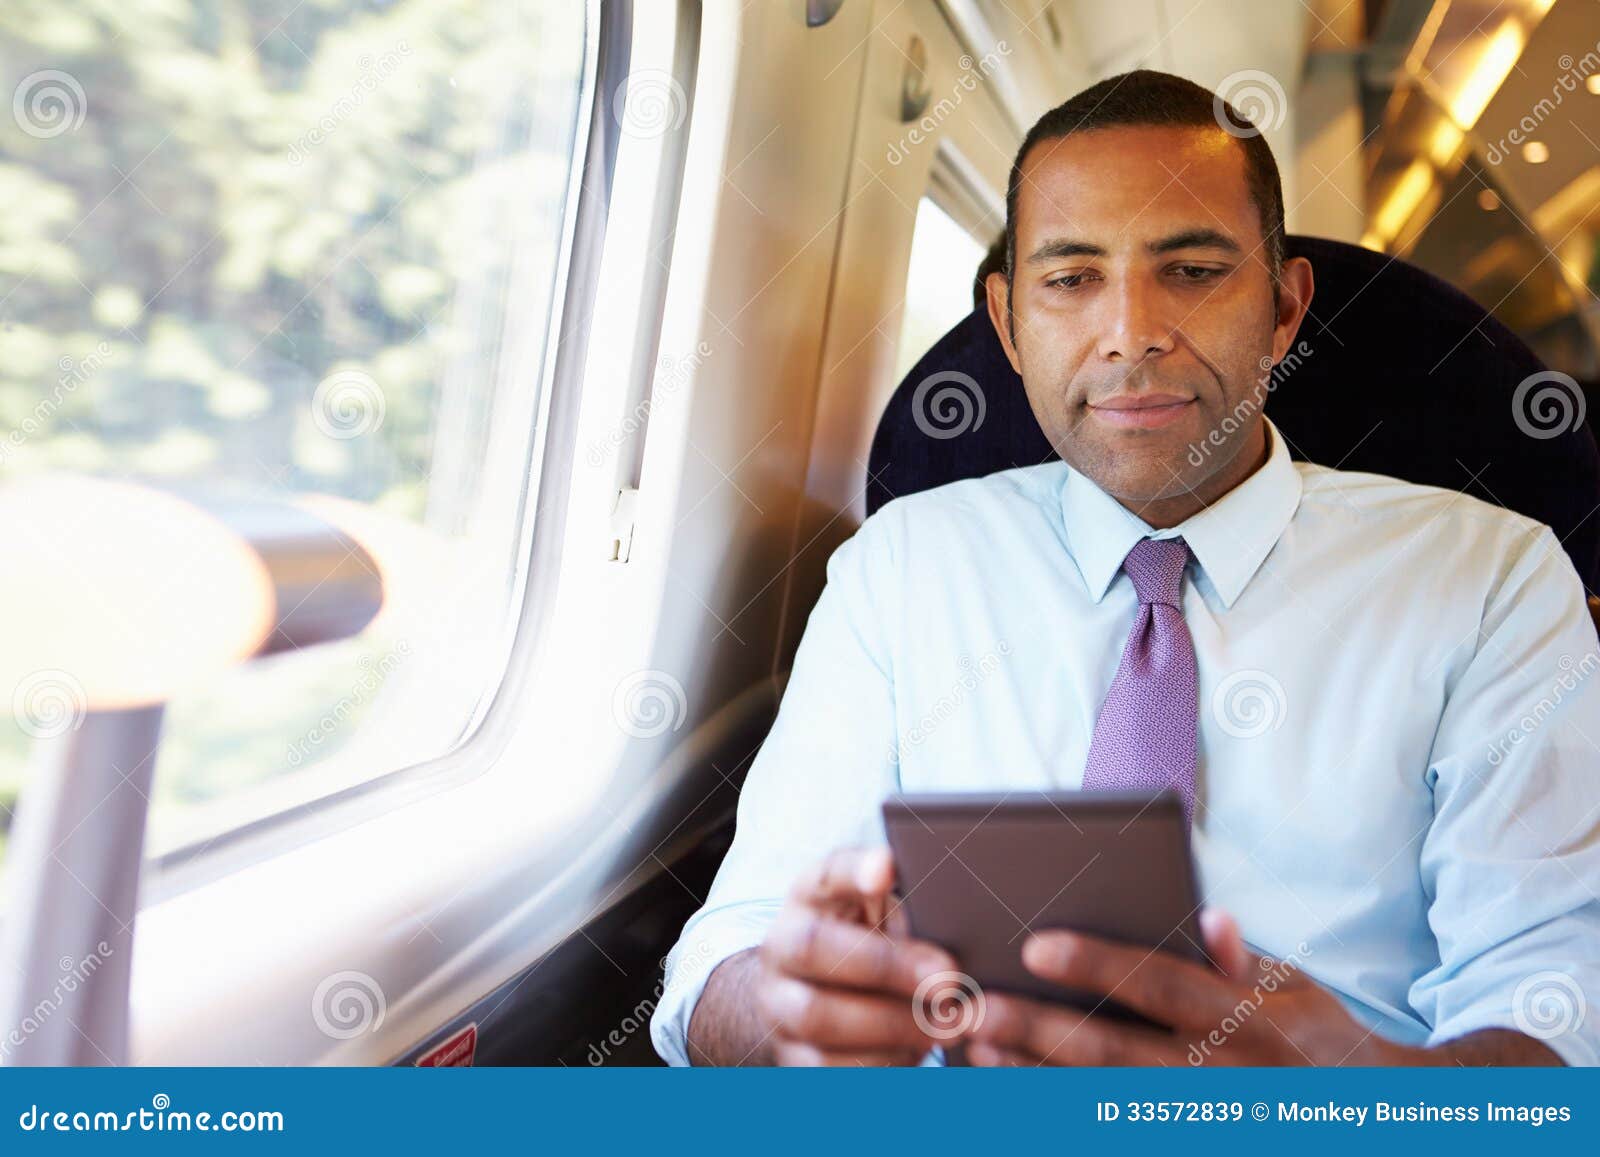 businessman commuting on train reading a book